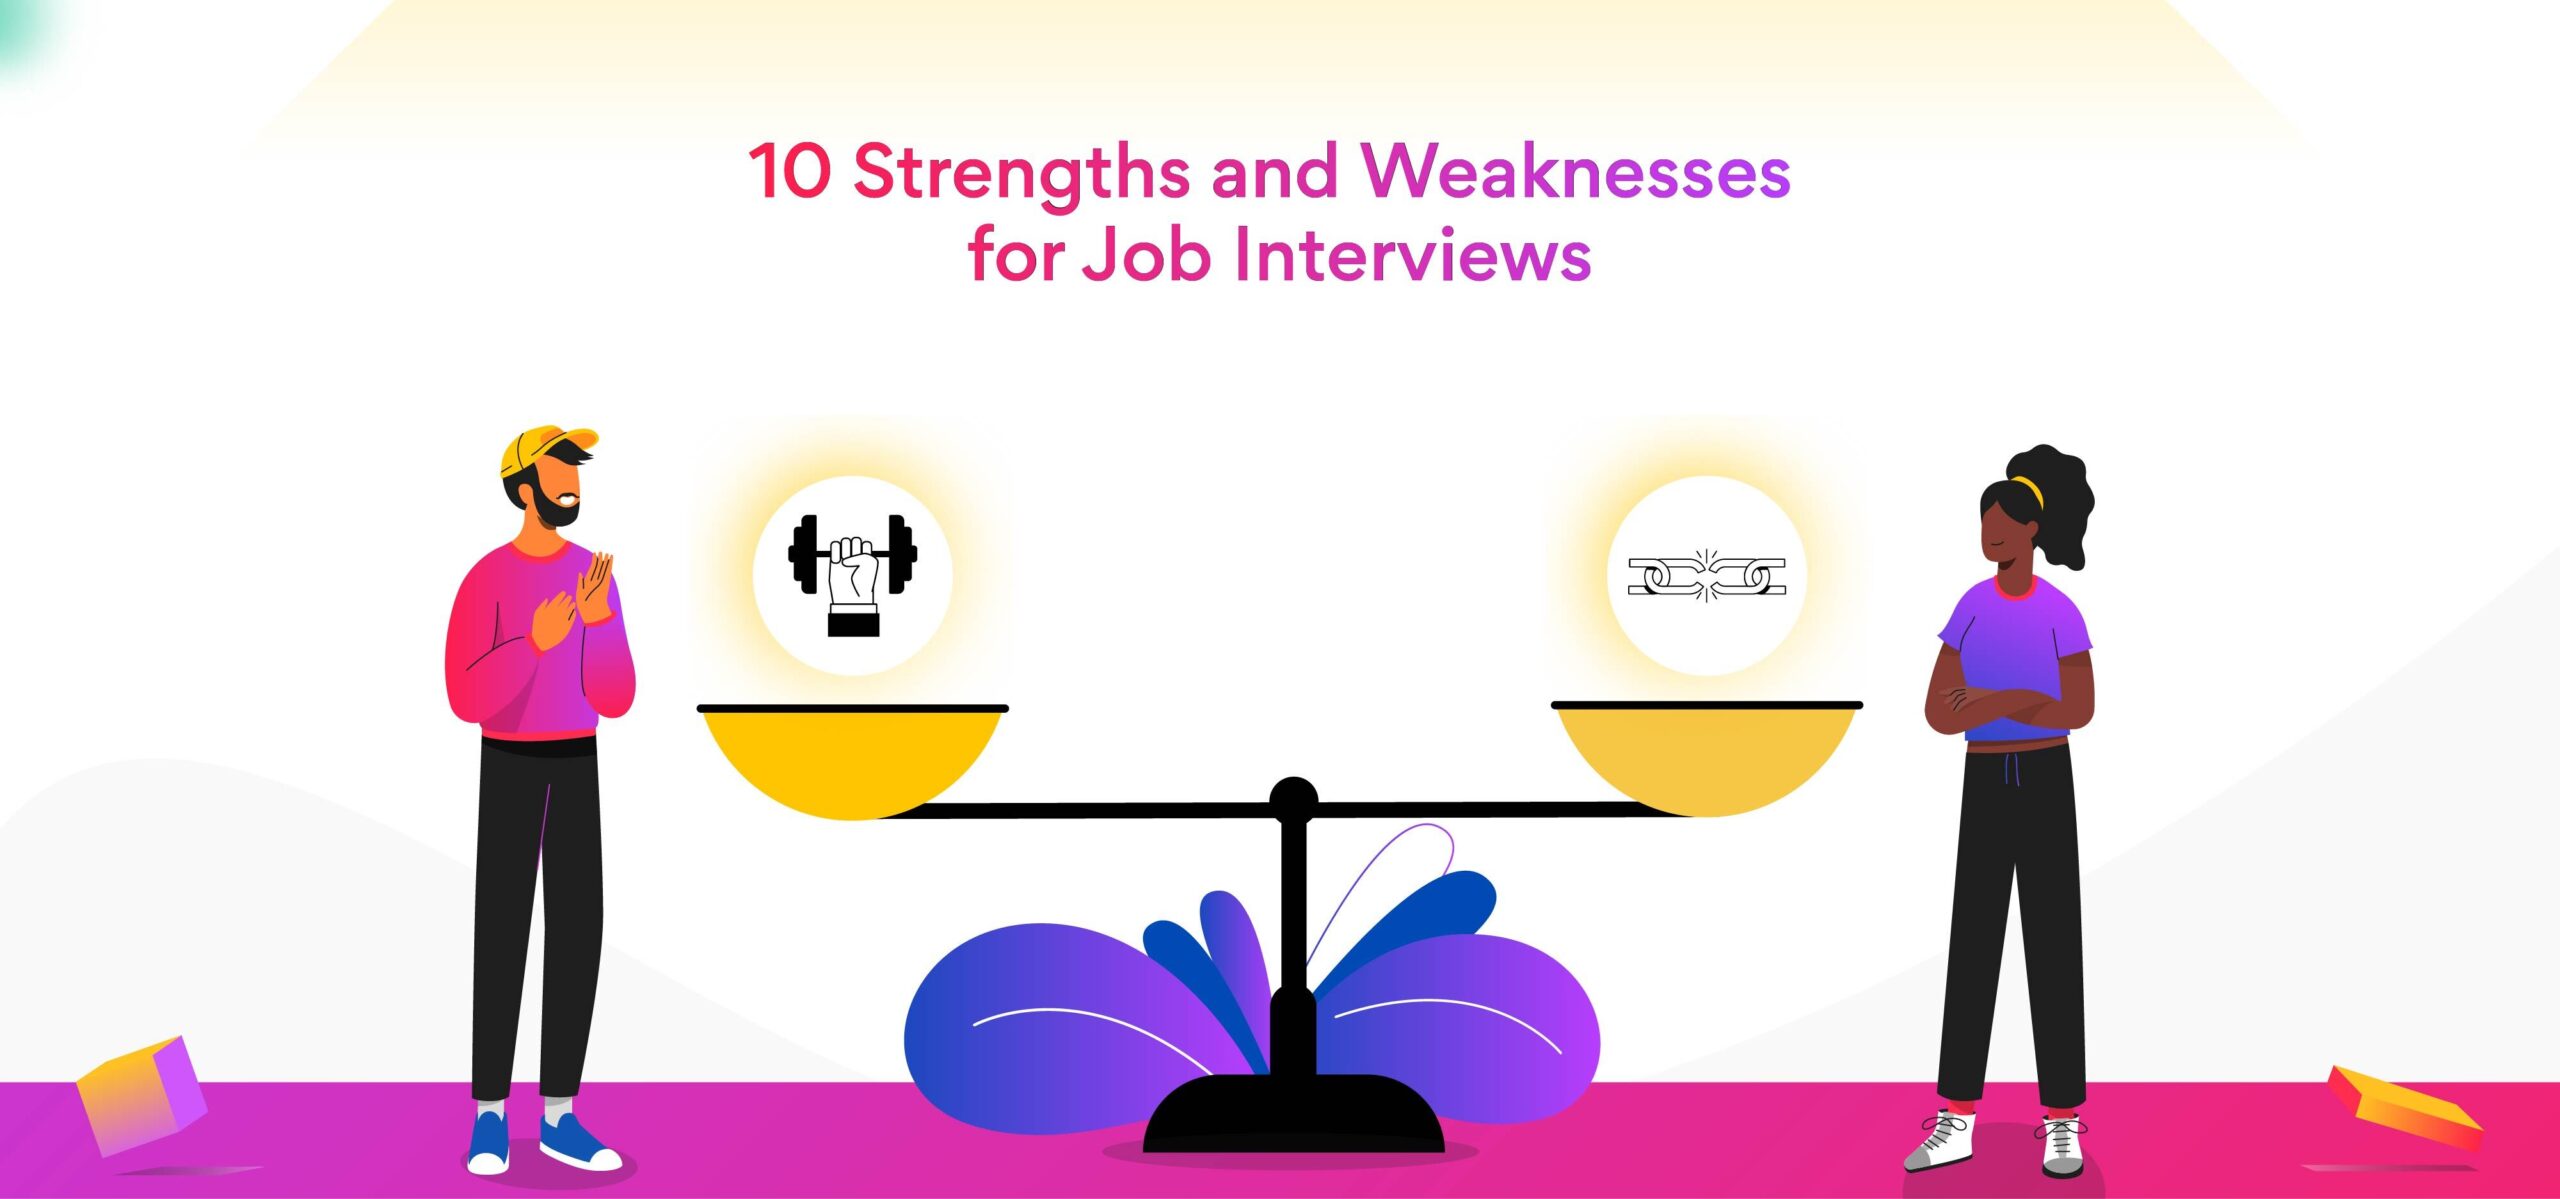 10 Examples of Strengths and Weaknesses for Job Interviews